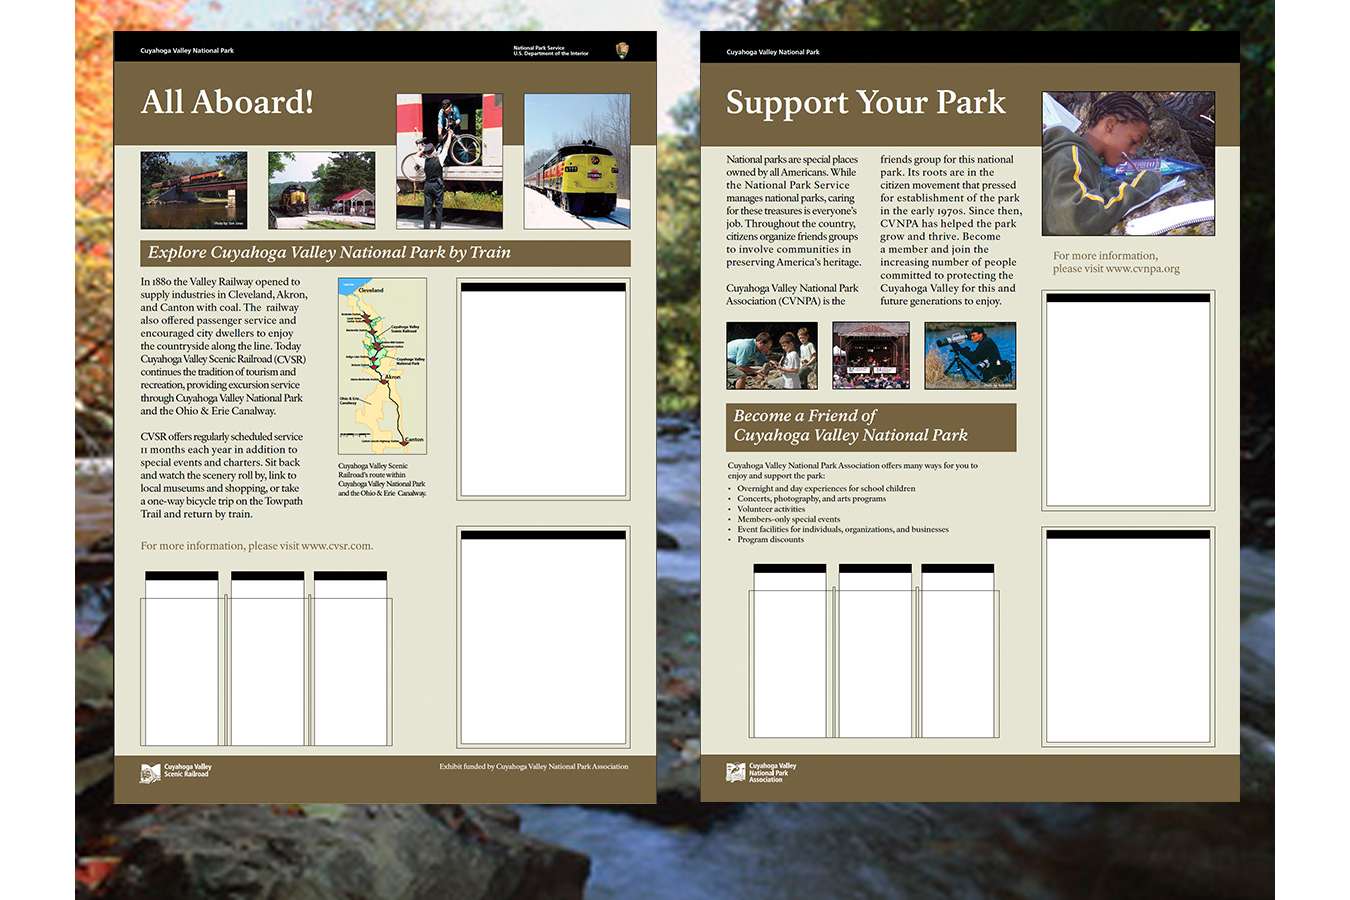 CUVANPS5 : Waysides for the park included brochure holders for maps, flyers, daily schedules and updates